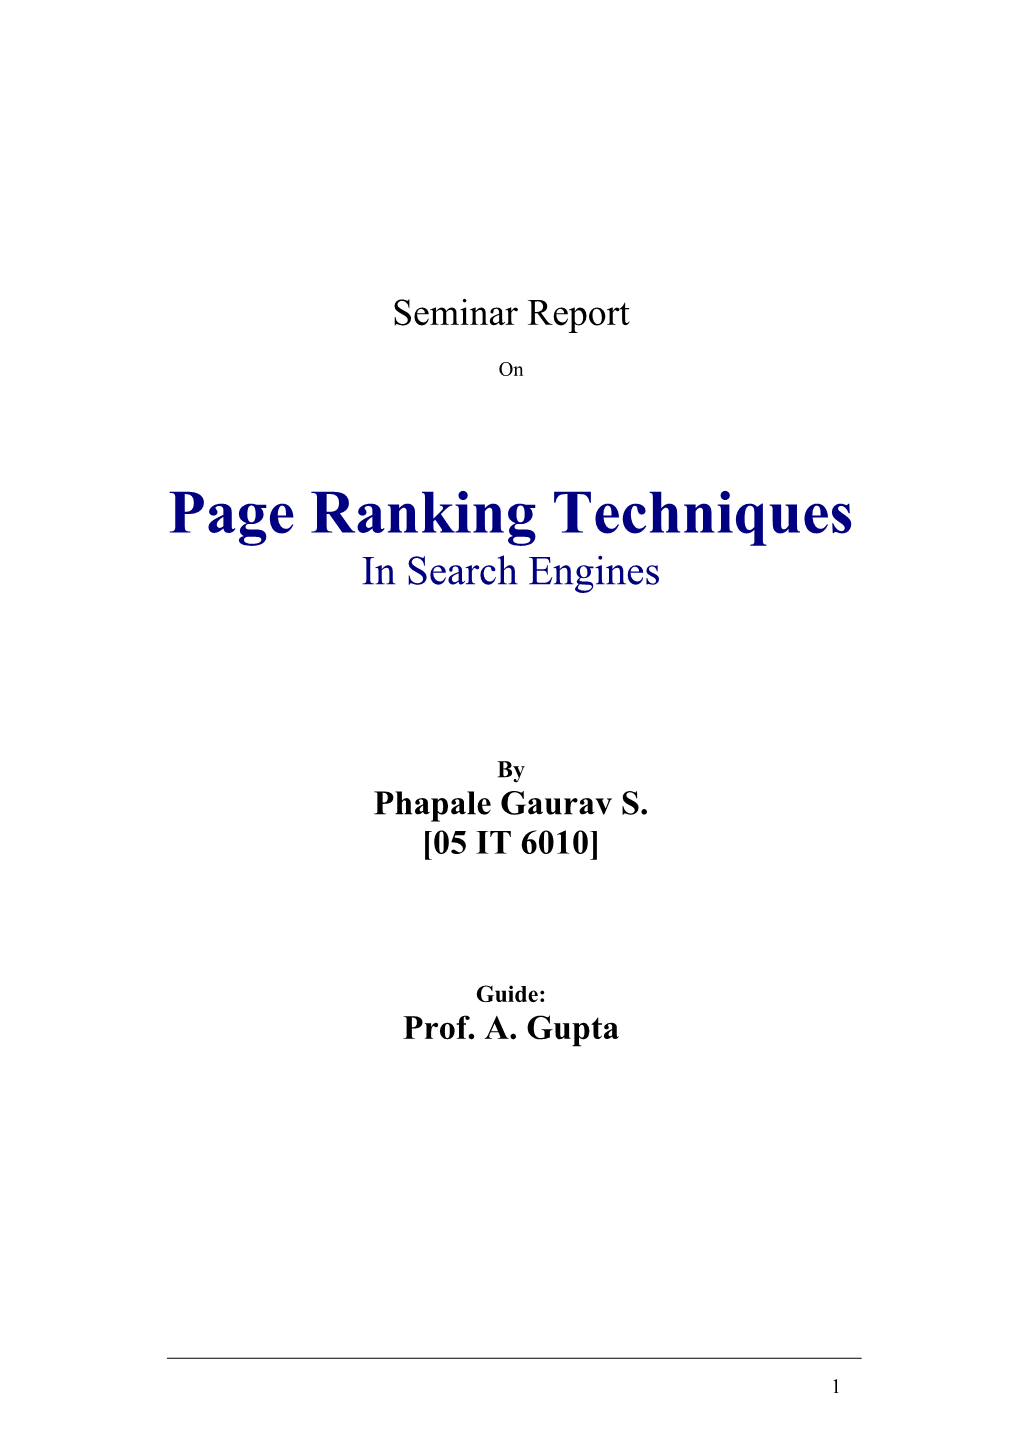 Page Ranking Techniques